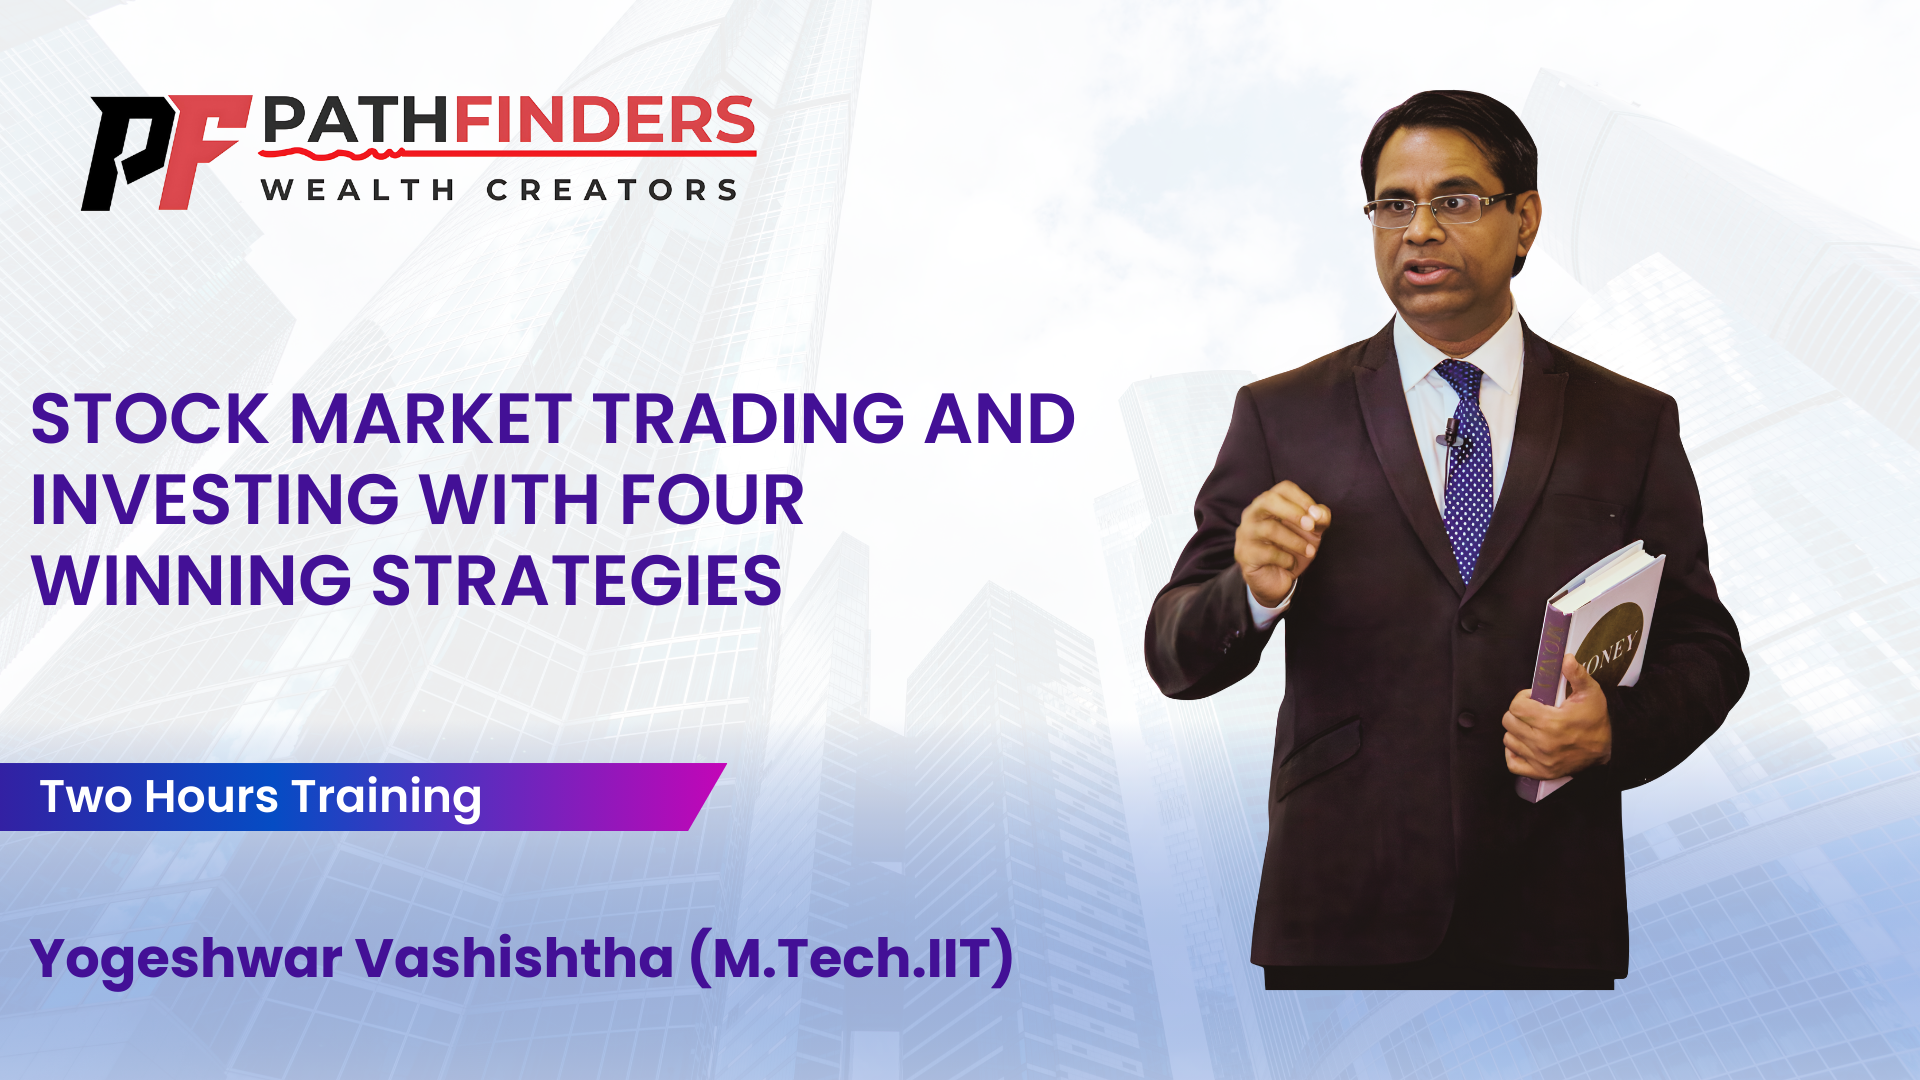 Free Webinar by Mr. Yogeshwar (M.Tech-IIT) on Stock Market Trading & Investing with Four Winning Strategies